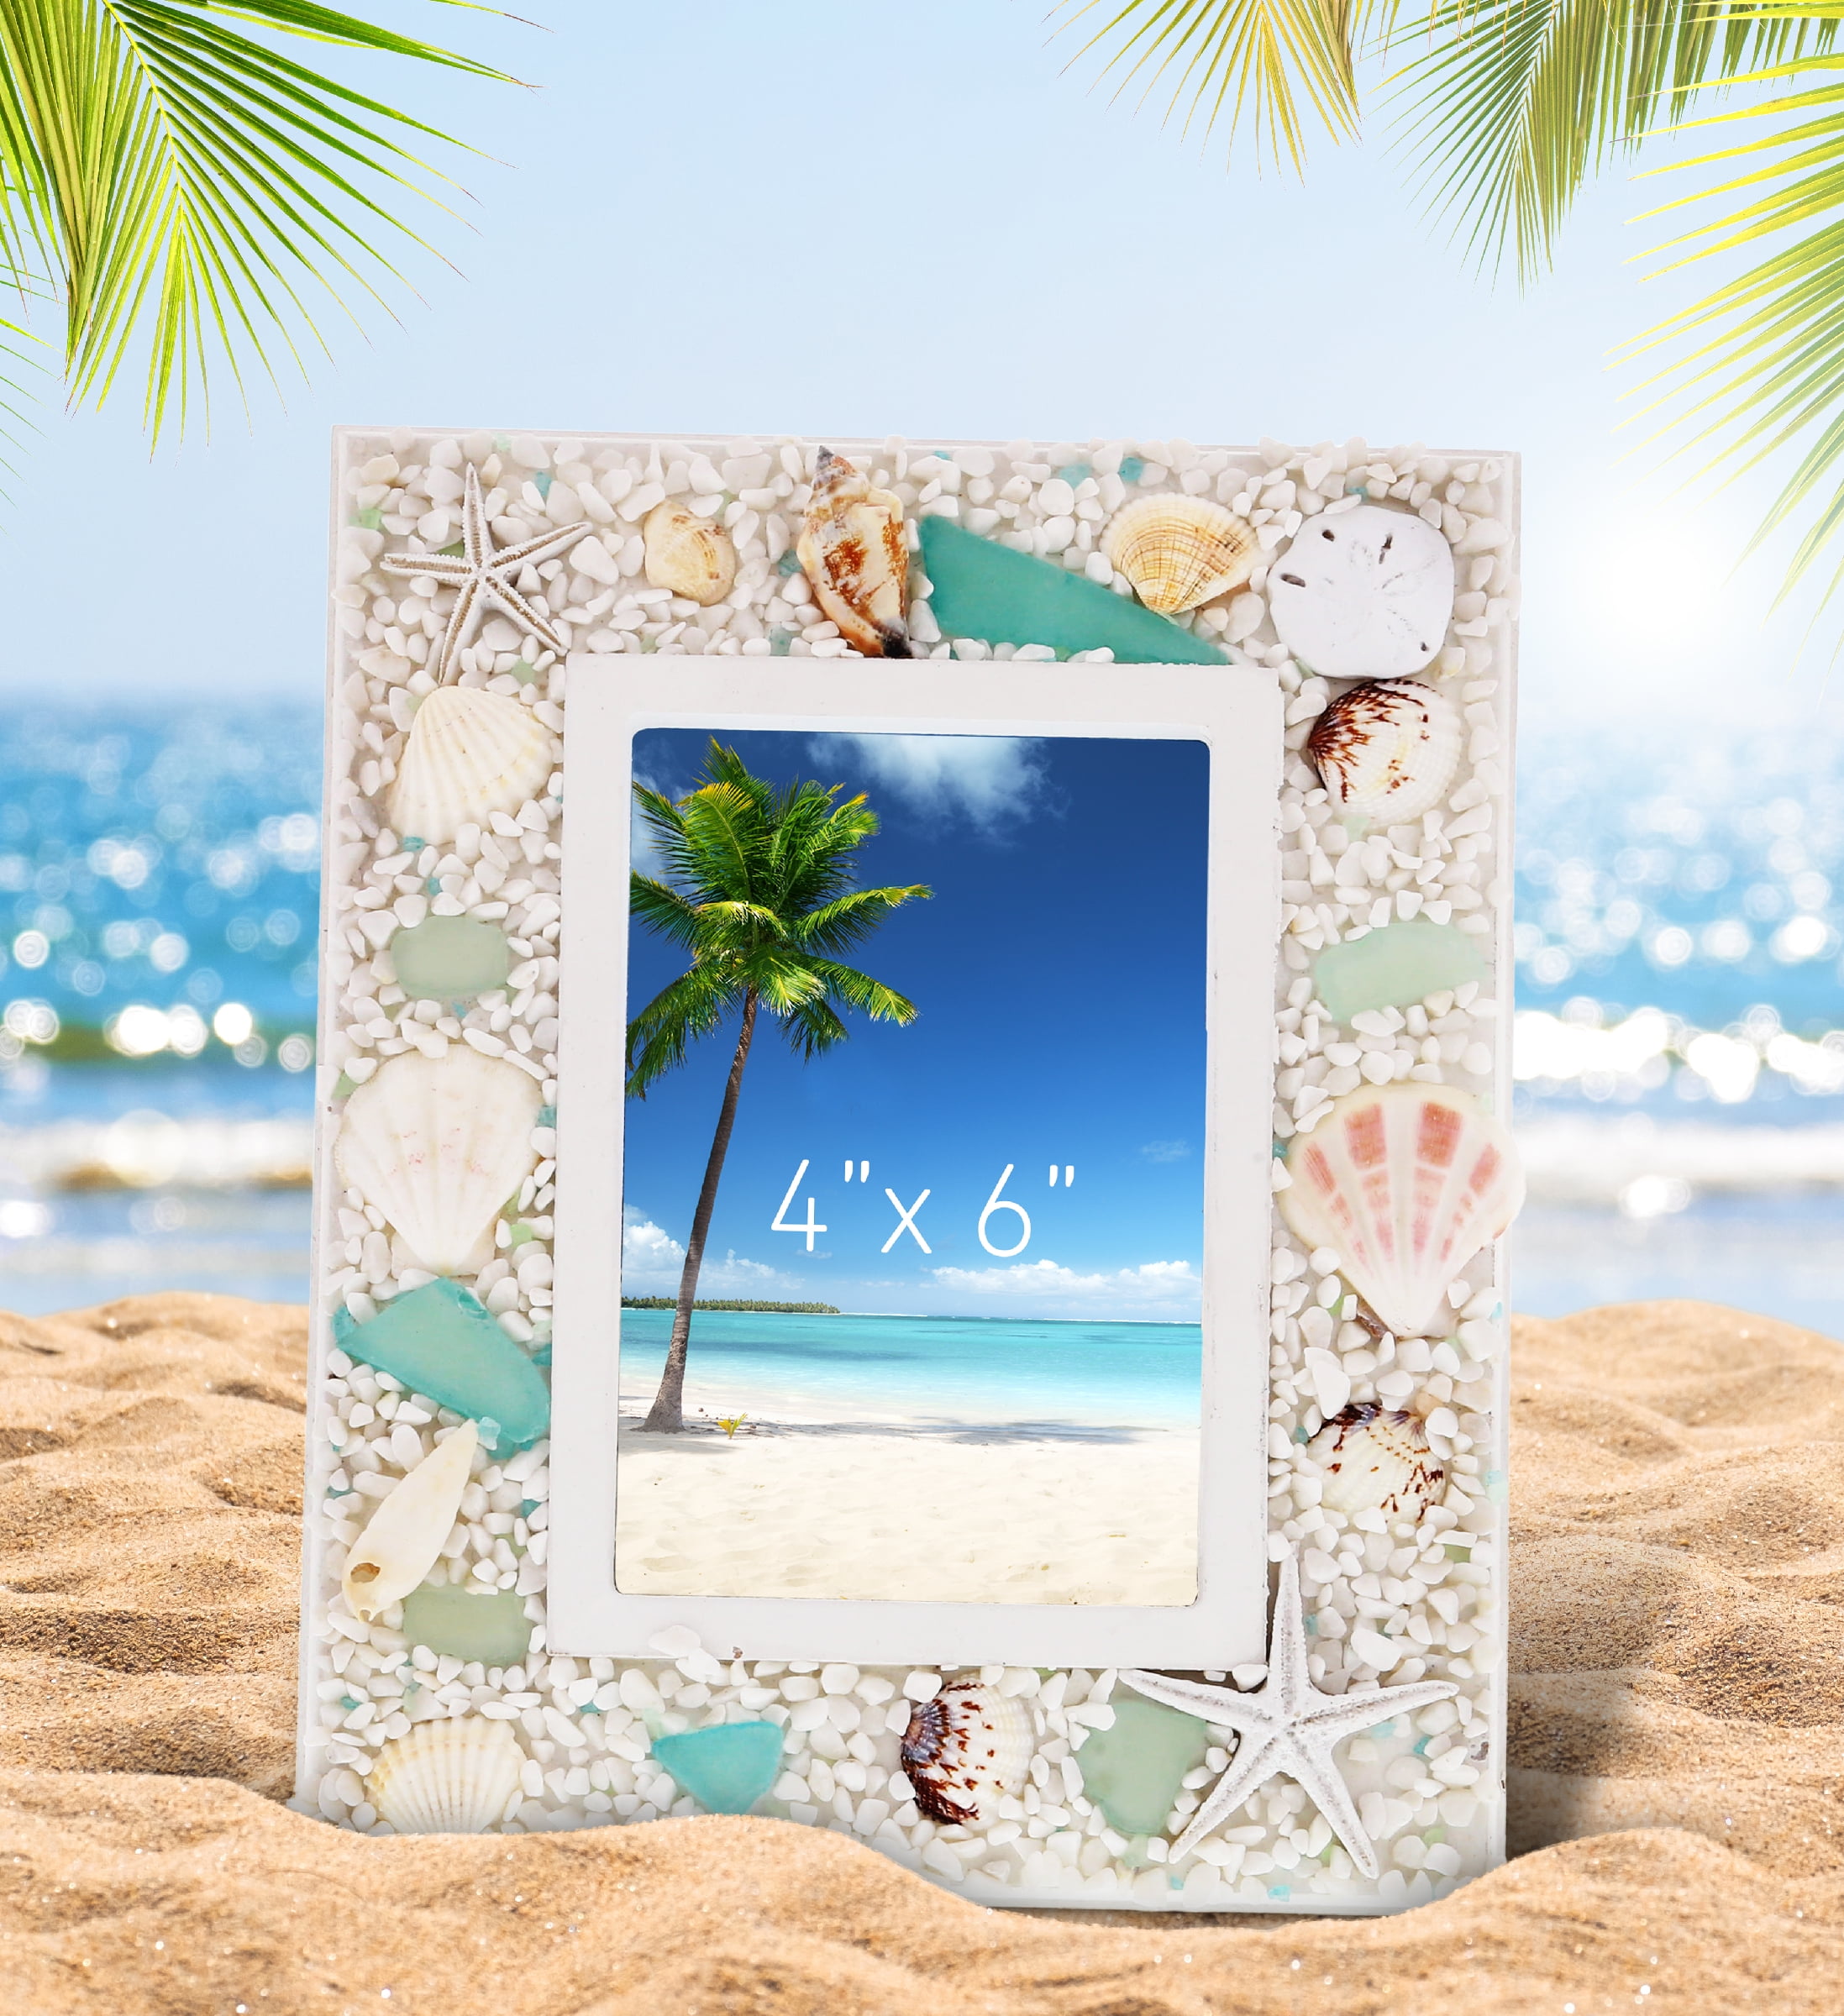 Modern Beach House Triple 4x6 Picture Wood Photo Frame with